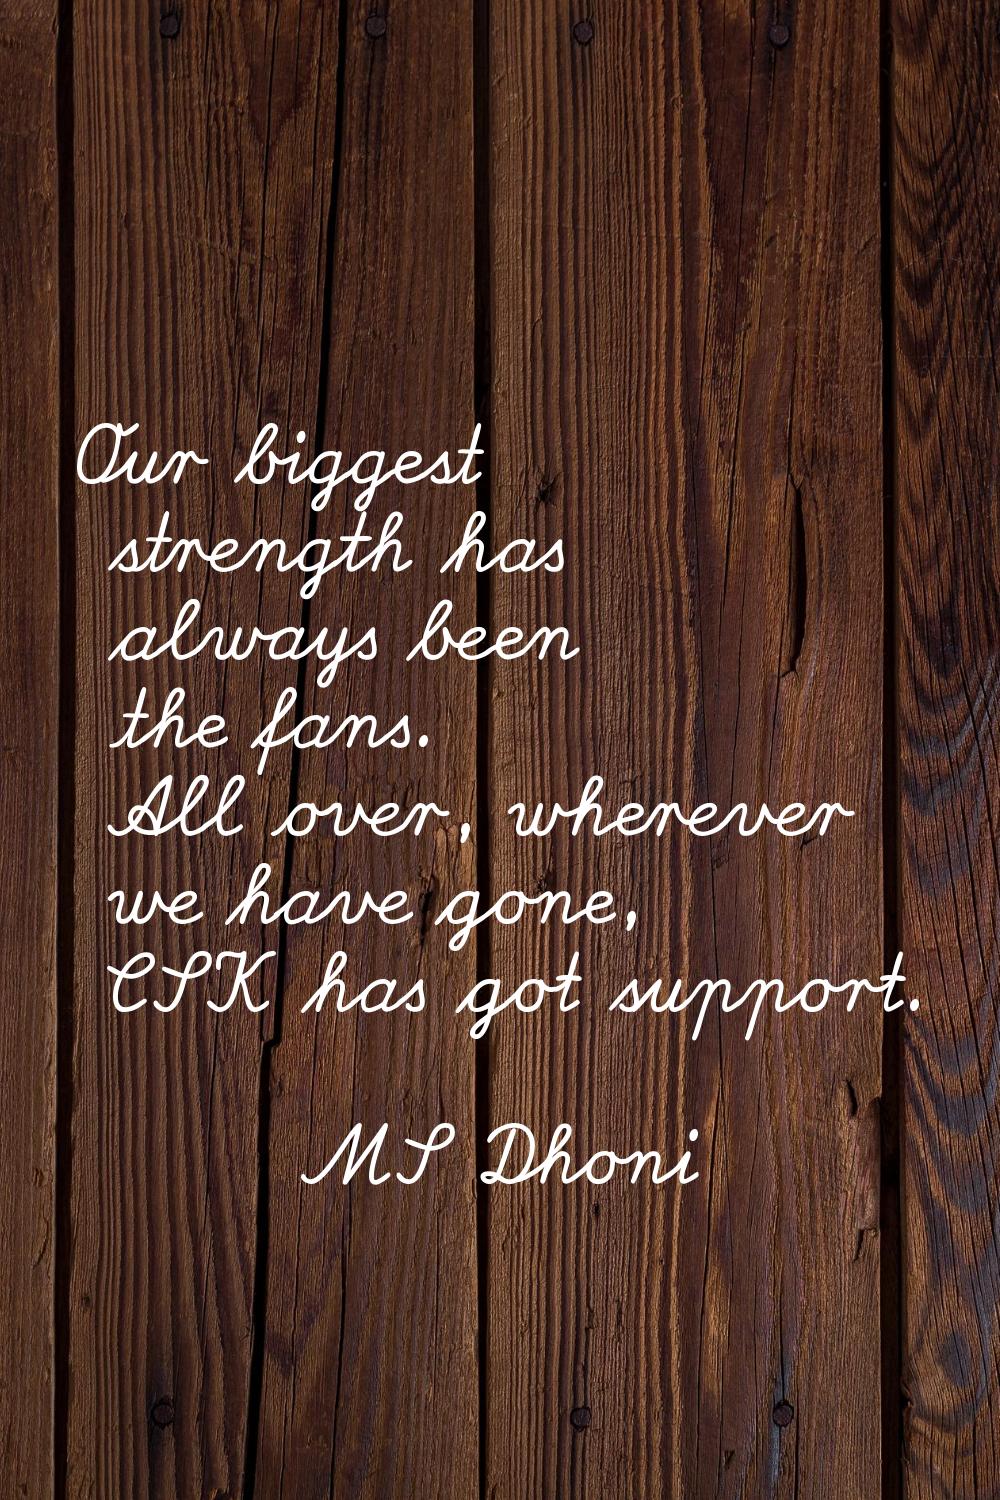 Our biggest strength has always been the fans. All over, wherever we have gone, CSK has got support